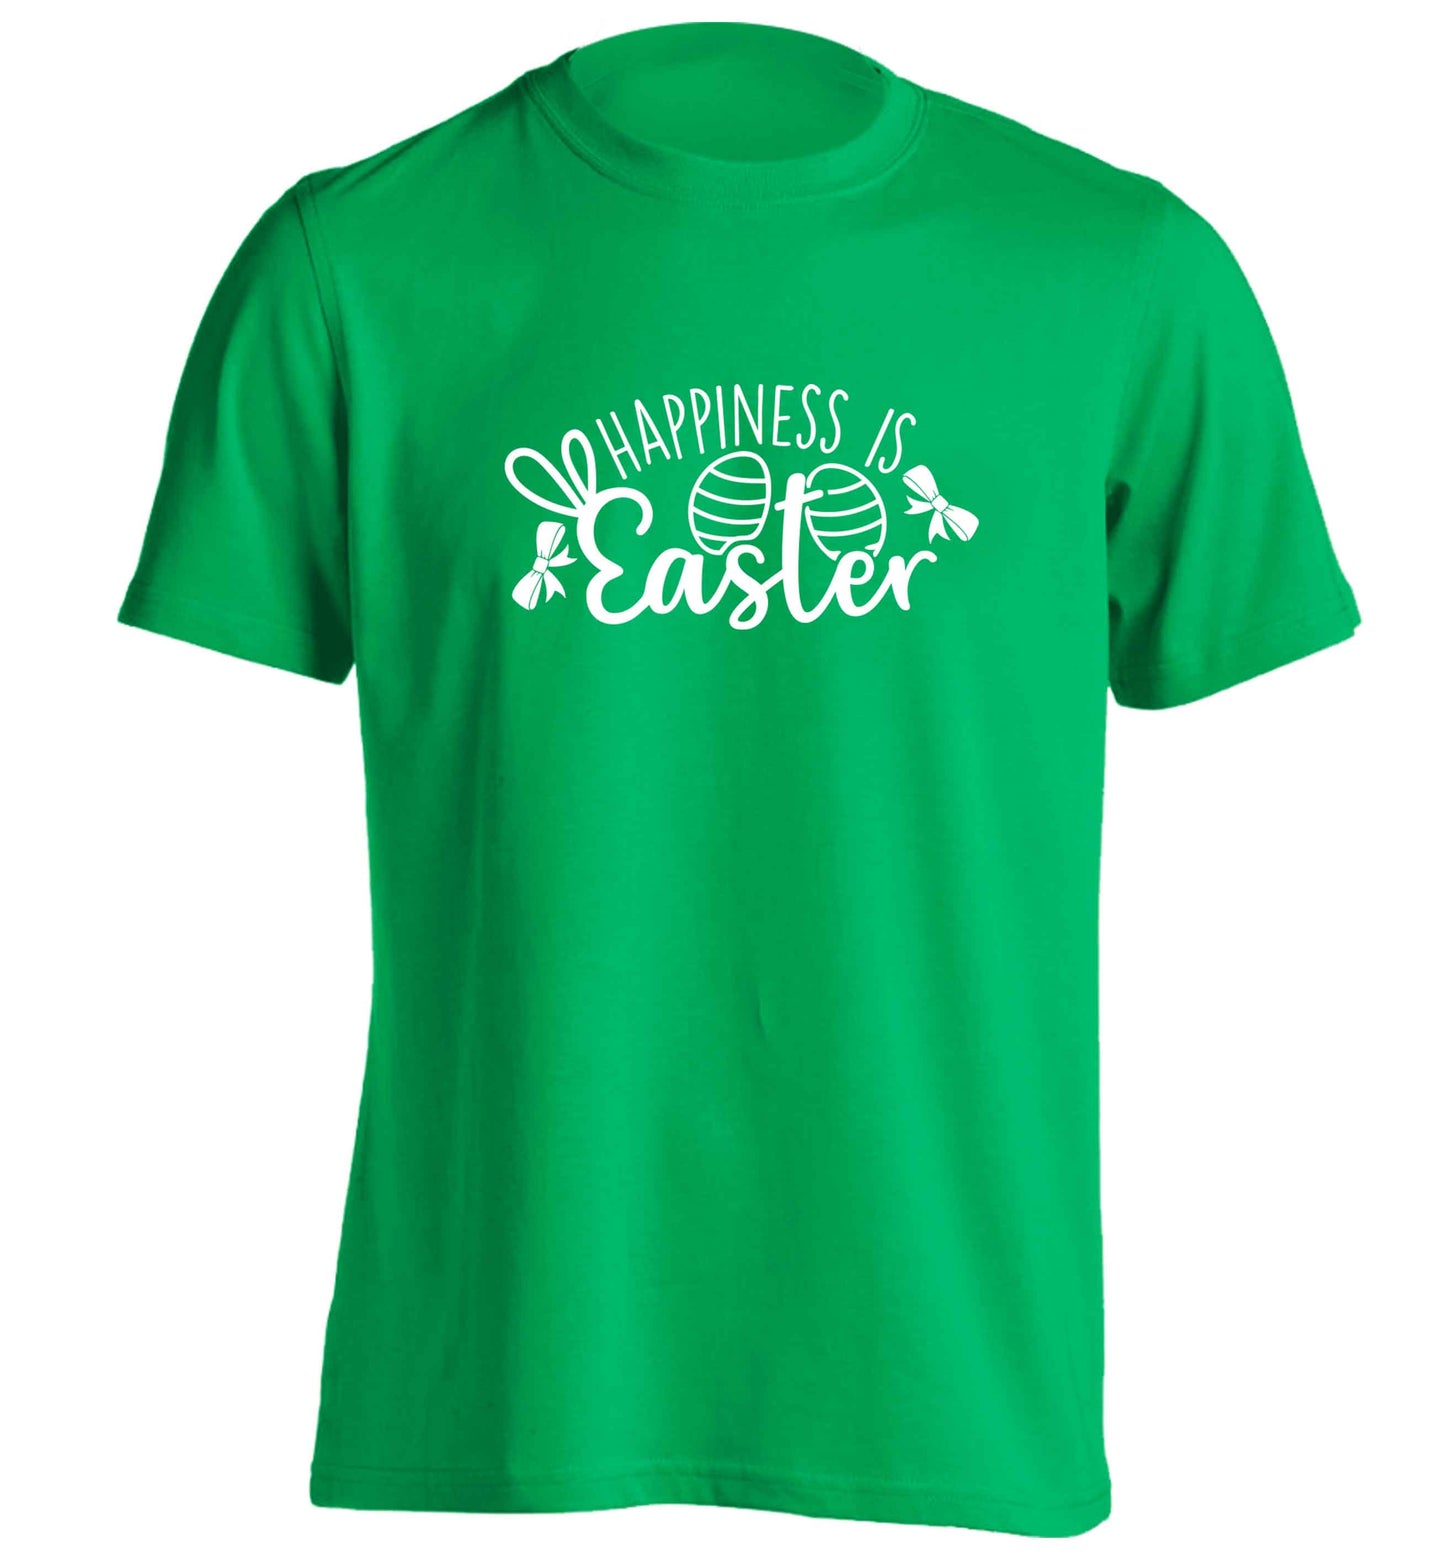 Happiness is easter adults unisex green Tshirt 2XL